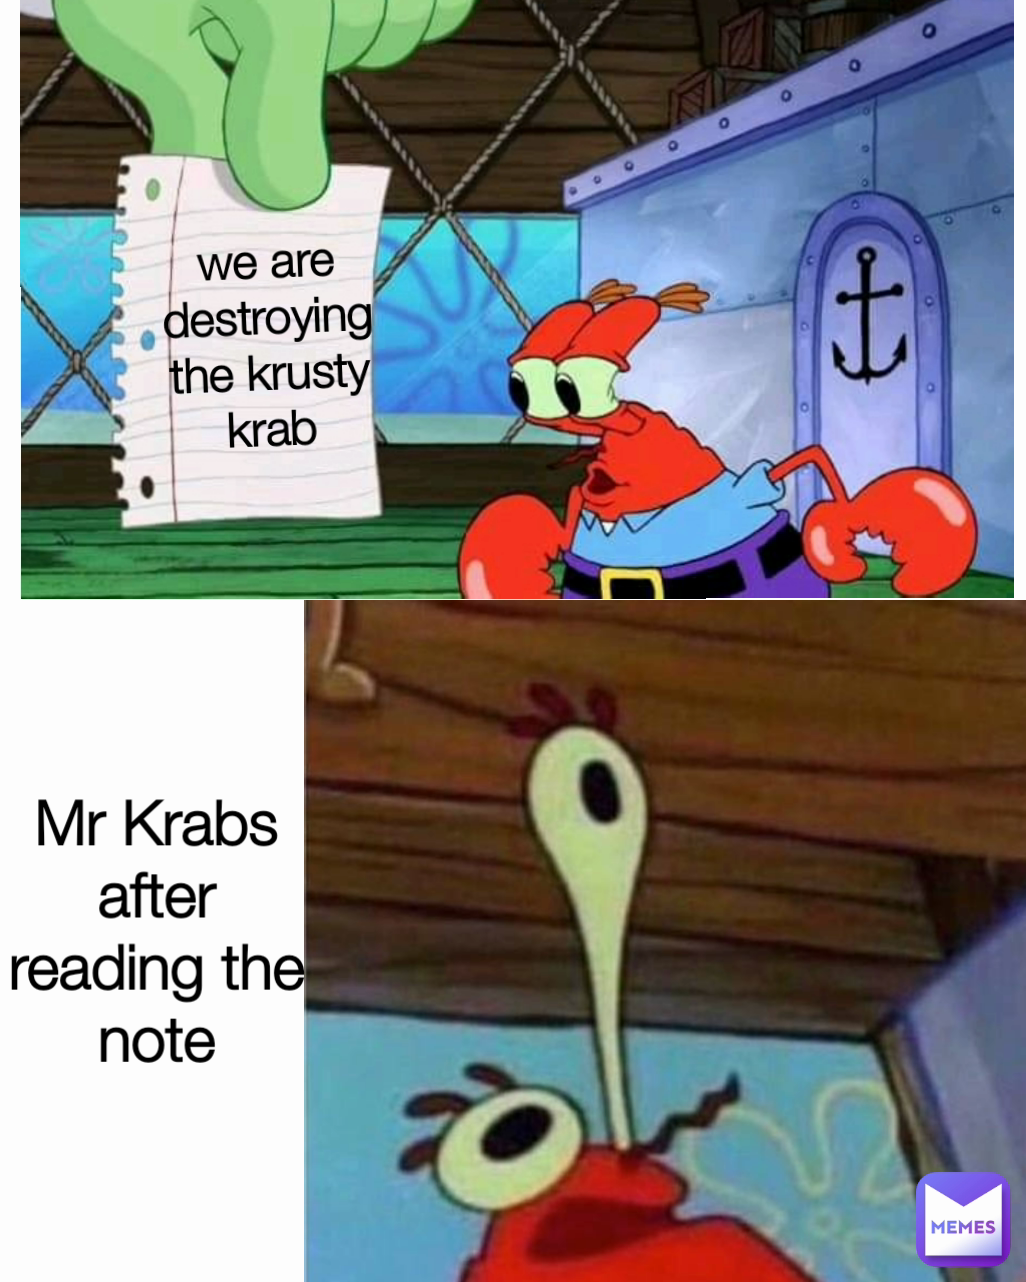 we are destroying the krusty krab Mr Krabs after reading the note